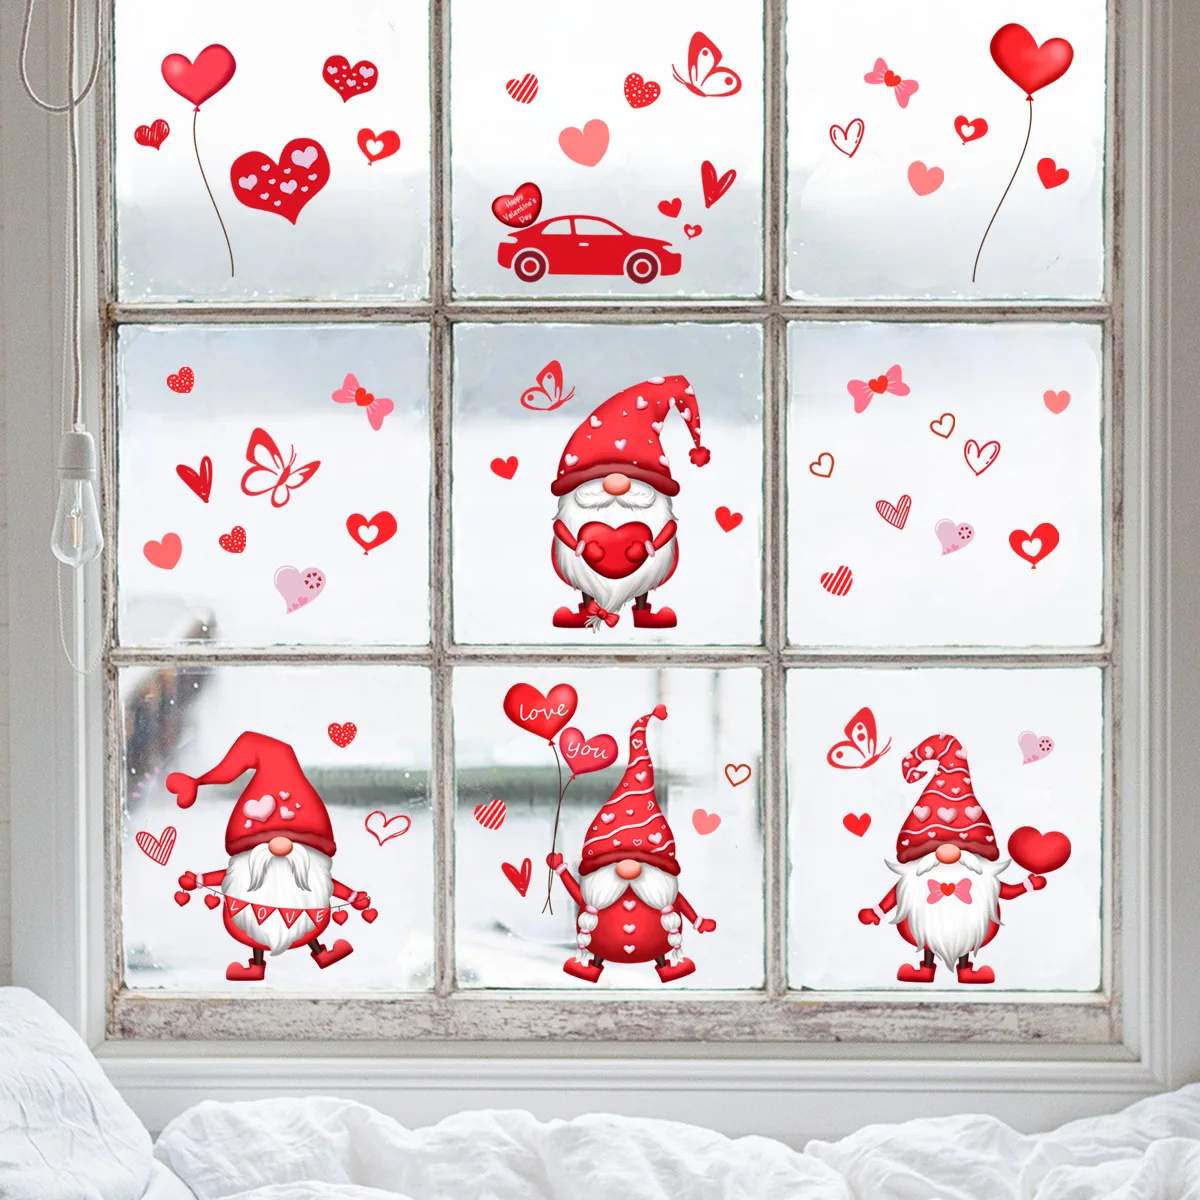 4pcs Valentine's Day Love Dwarf Wall Sticker Window Sticker Living Room Bedroom Study Restaurant  Decoration Mural Wall Sticker independence day little boy sticker diy window bedroom study living room background decor scene wall static stickers 45 60cm